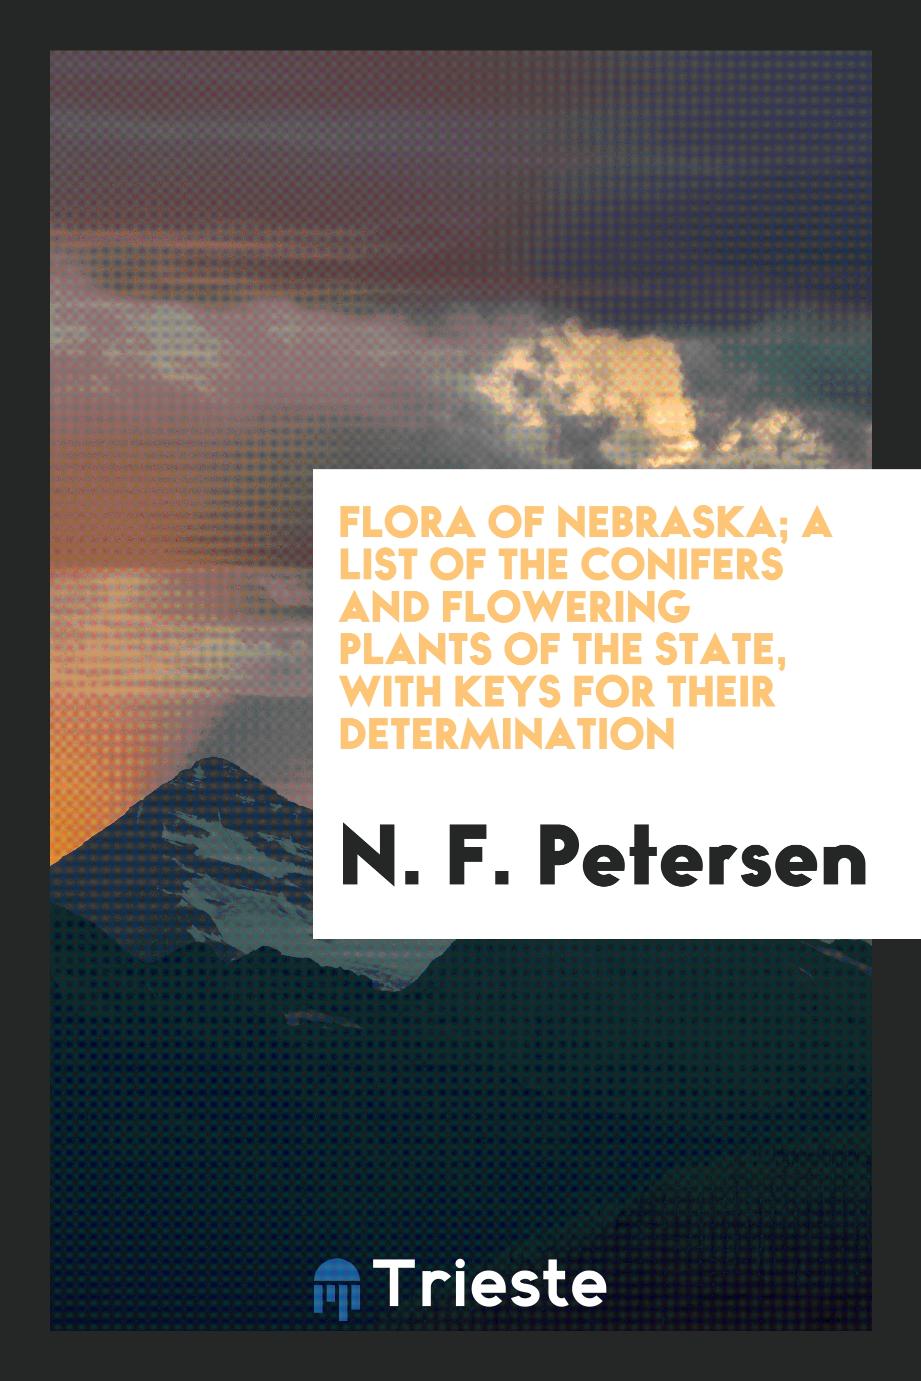 Flora of Nebraska; a list of the conifers and flowering plants of the state, with keys for their determination